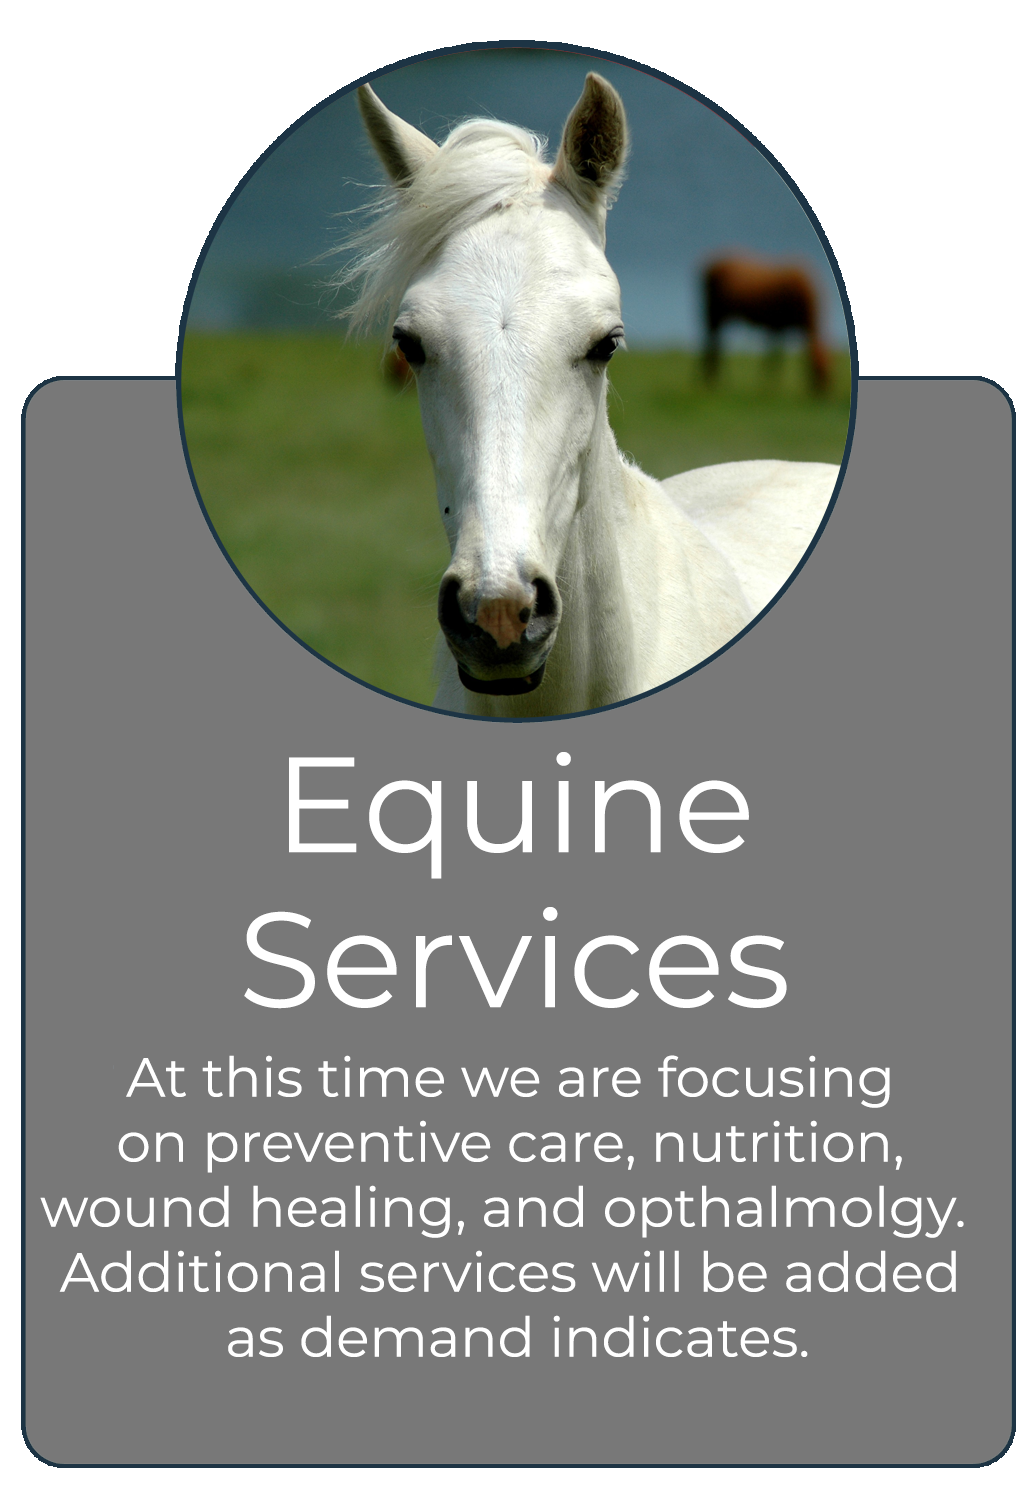 Equine Services - Click to read more about services